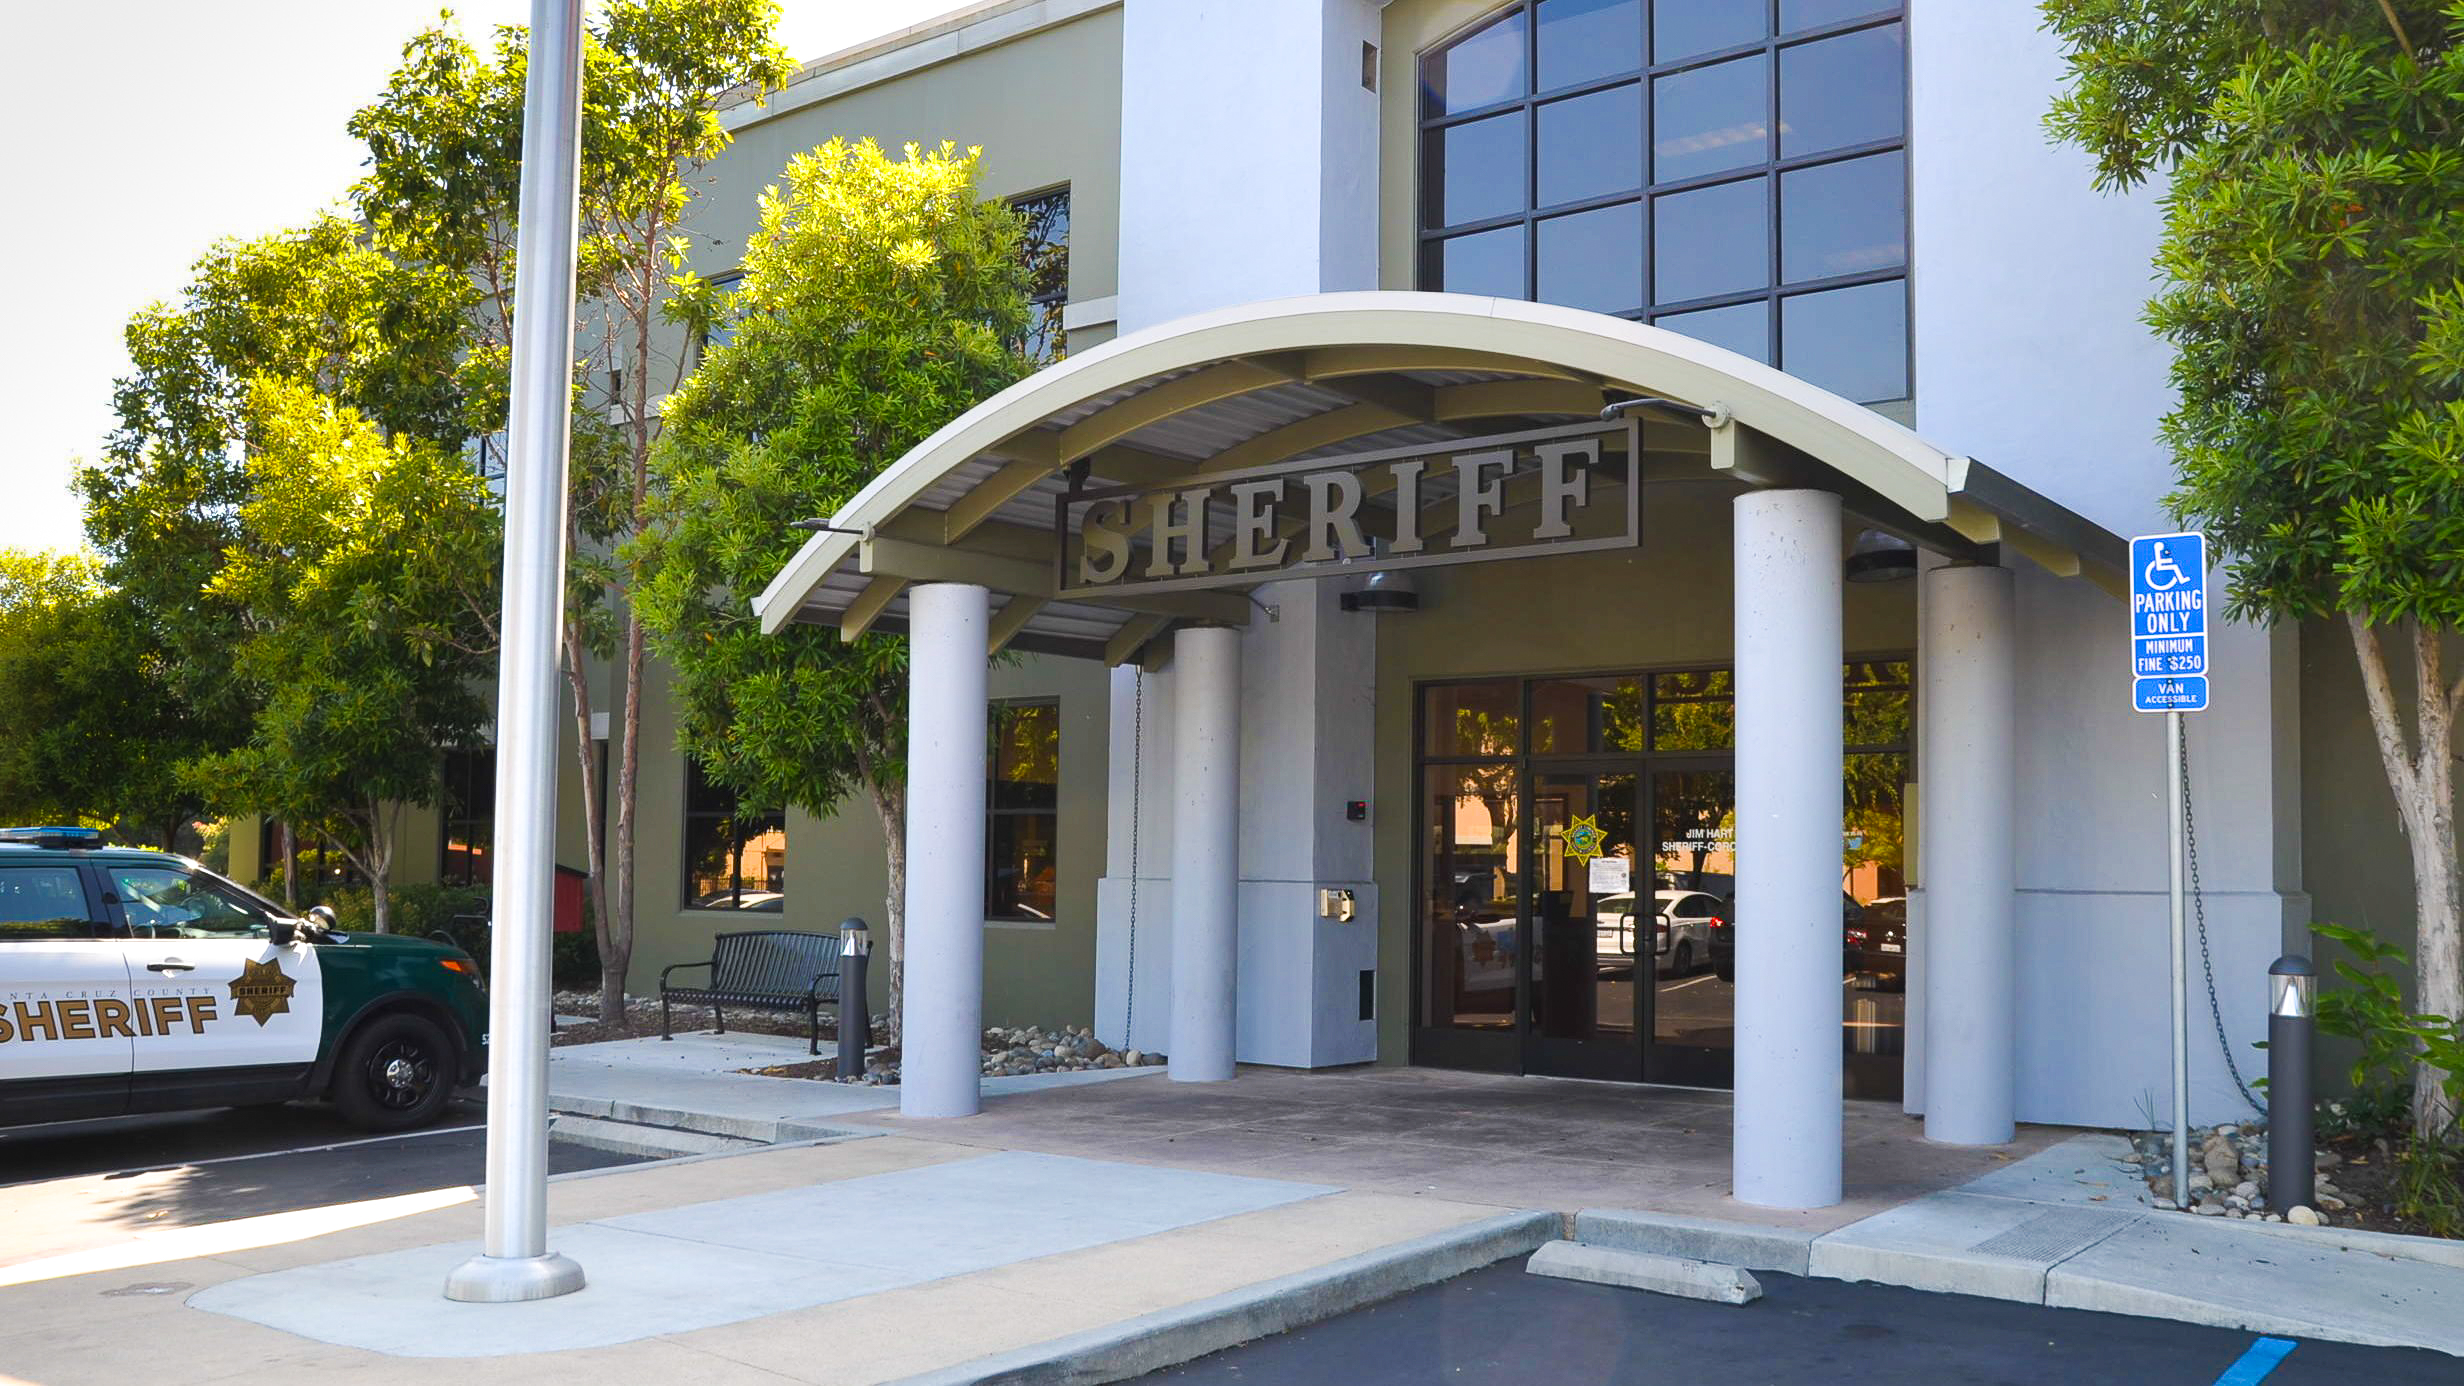 The Sheriff's Office at 5200 Soquel Ave. in Live Oak